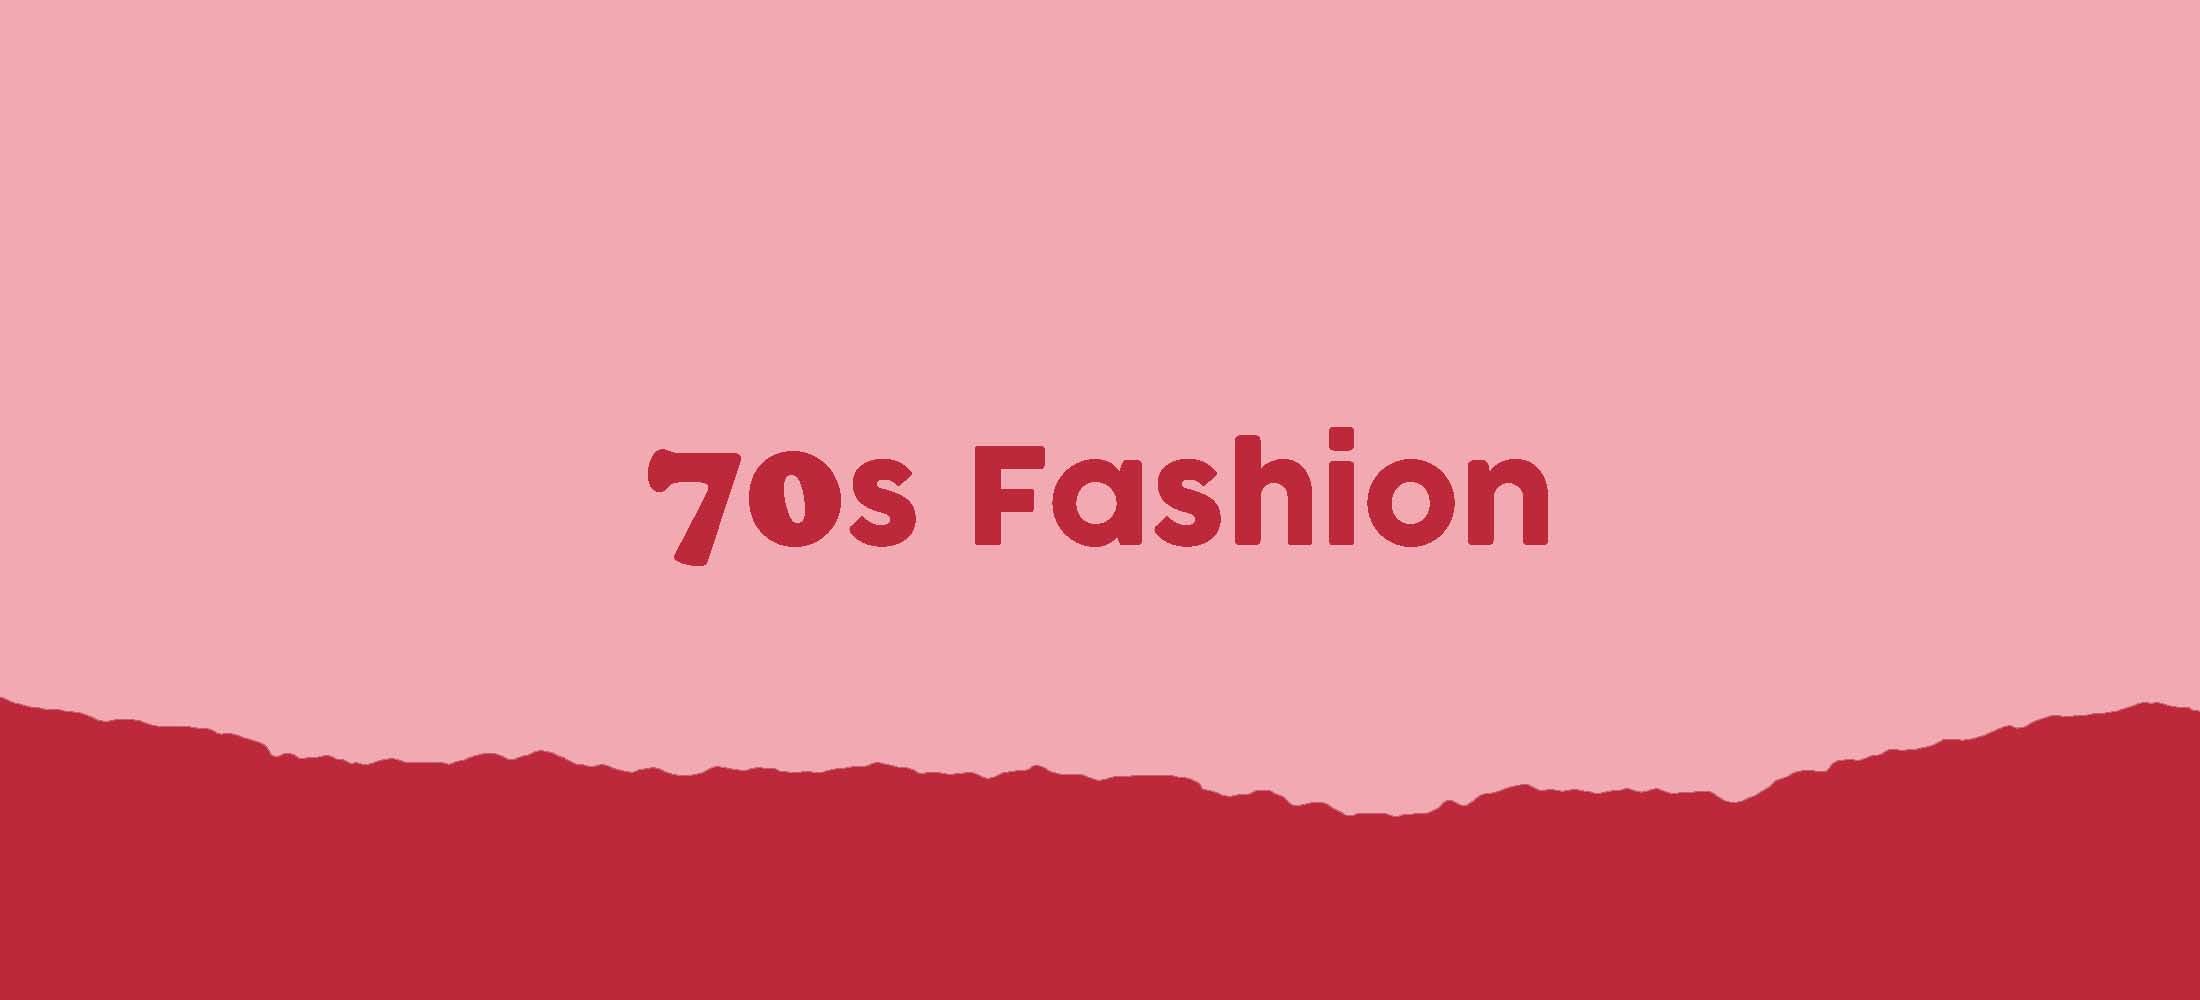 70s fashion trends grooving their way into women's wardrobes - Blue17